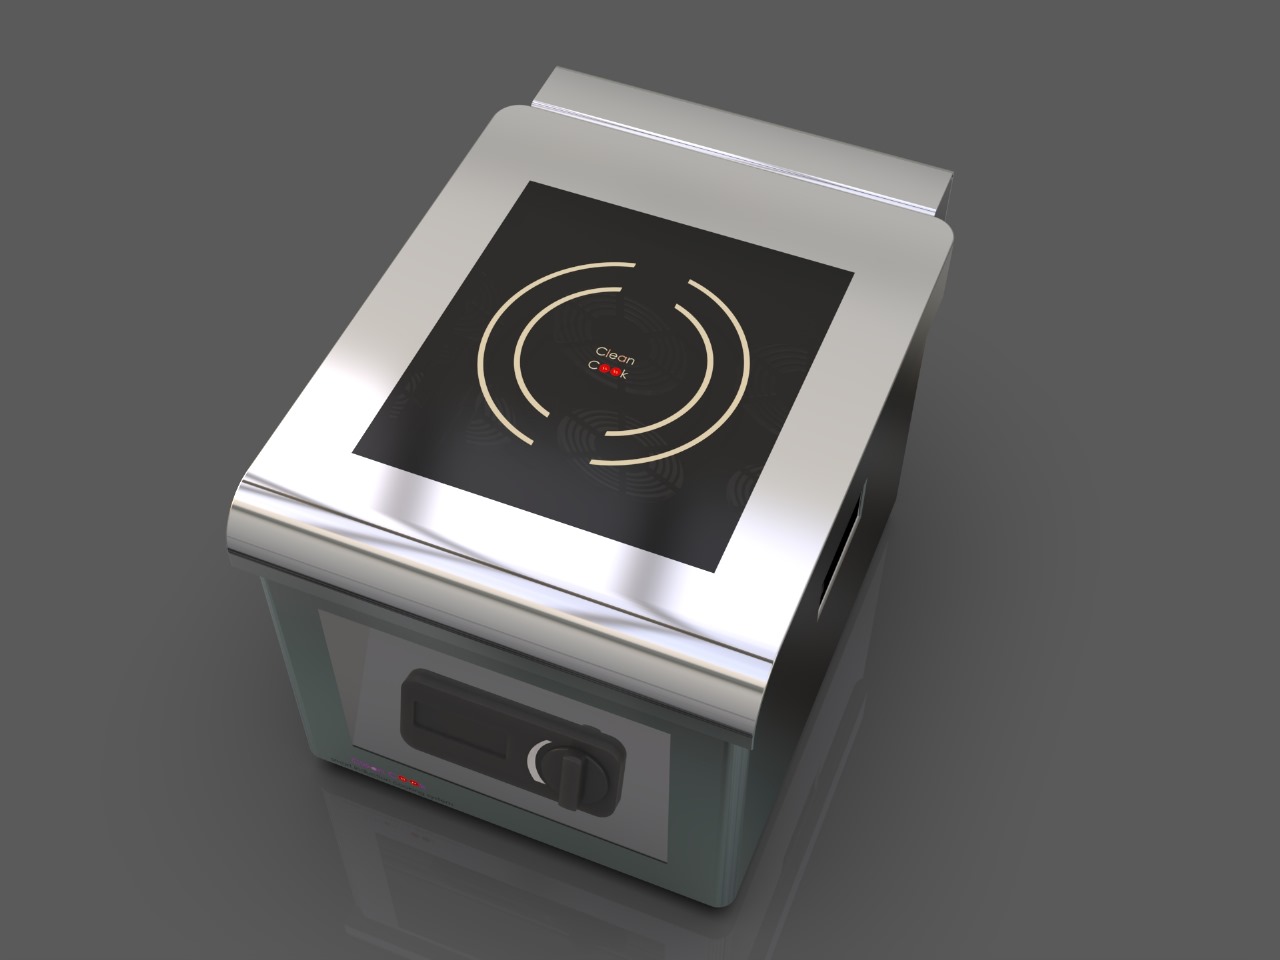 best quality induction cook top 9''inches easy to clean Temperature settings capacity 12 liters Fast heating power 3.5kw